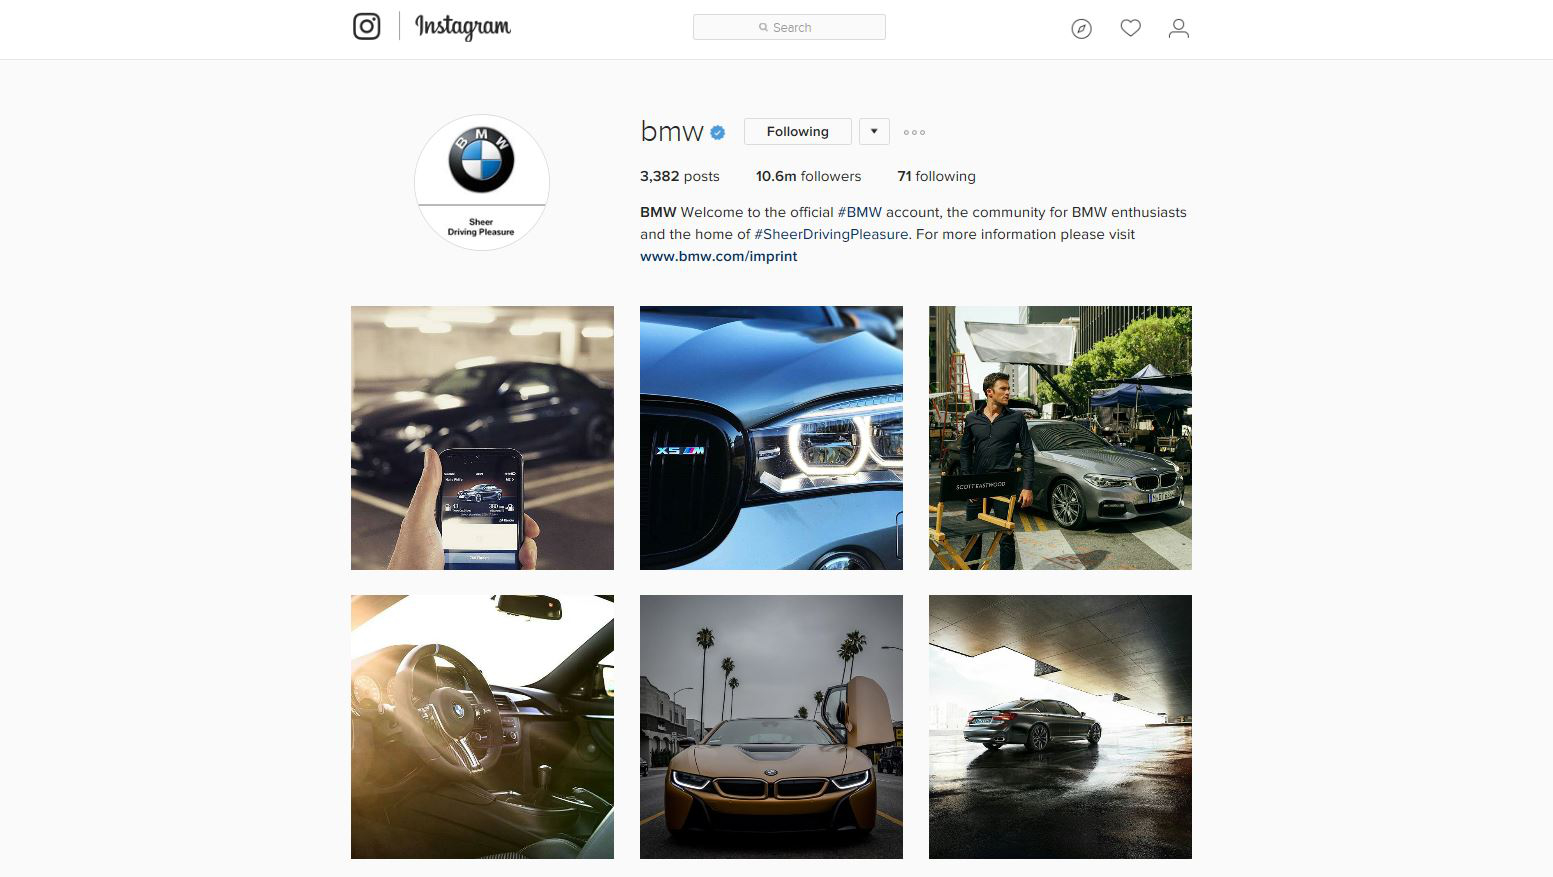 BMW`s Instagram Channel Has Reached More than 10 Million Followers